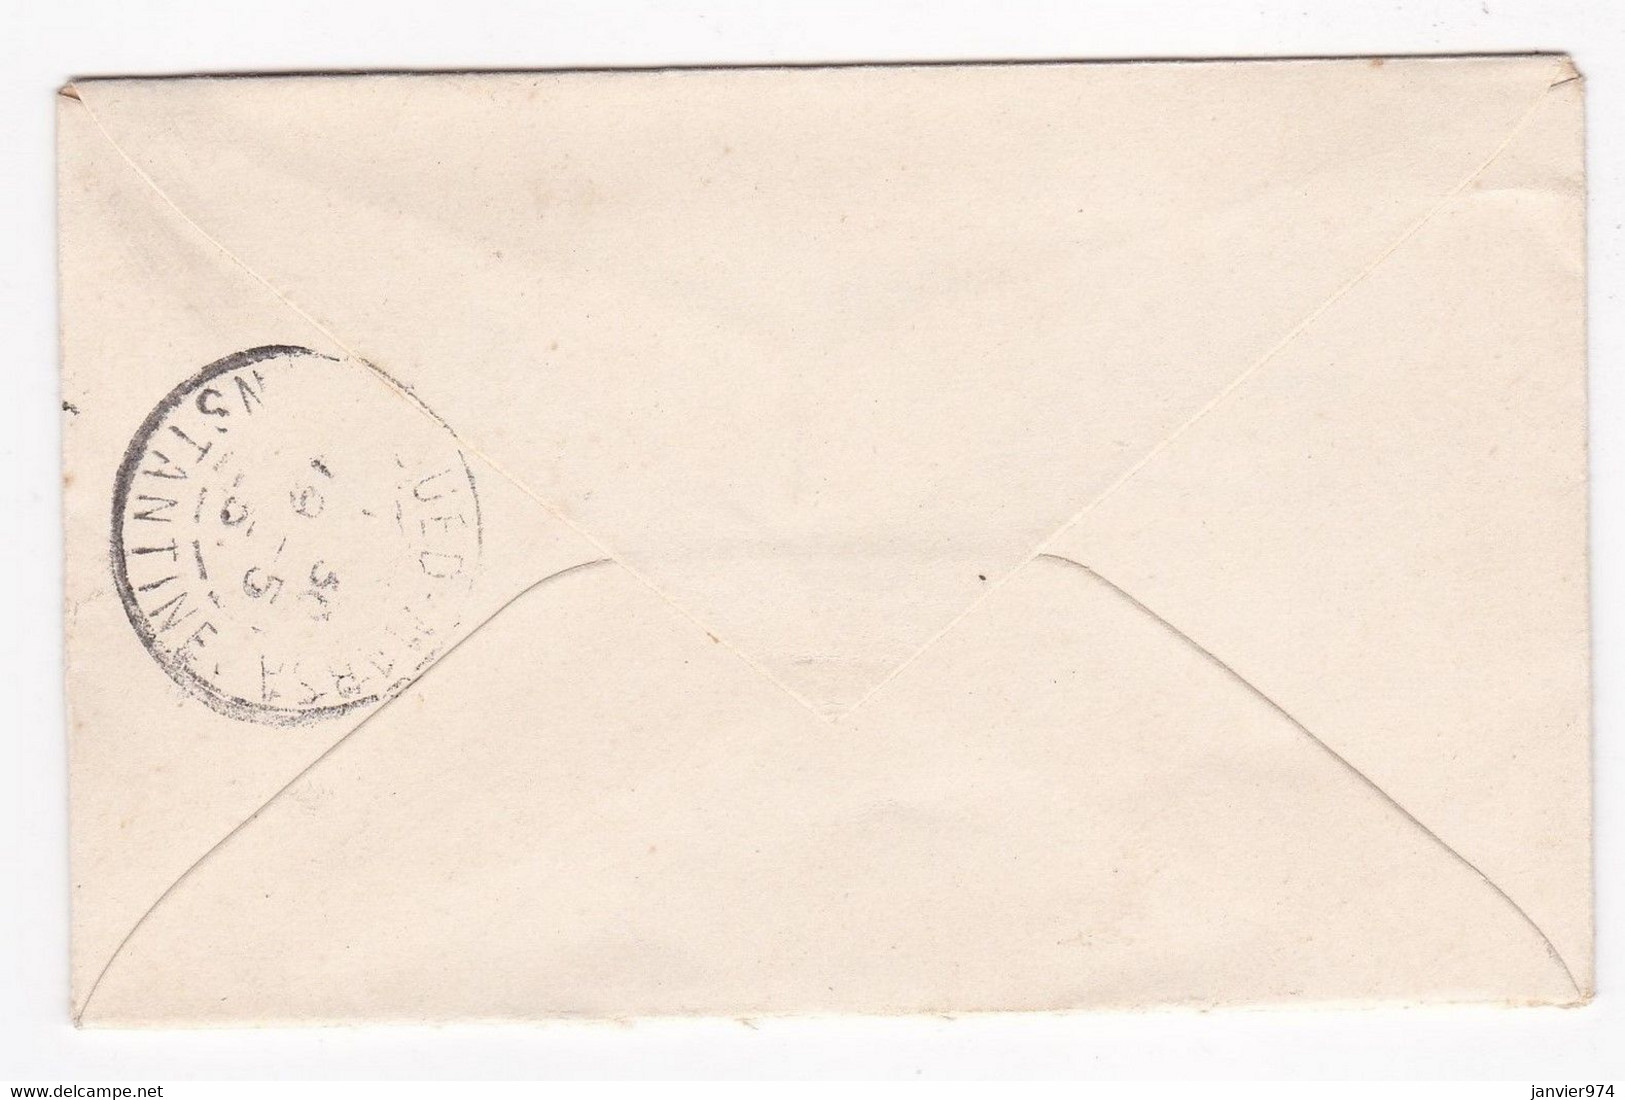 Oued Marsa , Pour Mr Byr , 2 Cachets   Oued Marsa 1925 - Covers & Documents